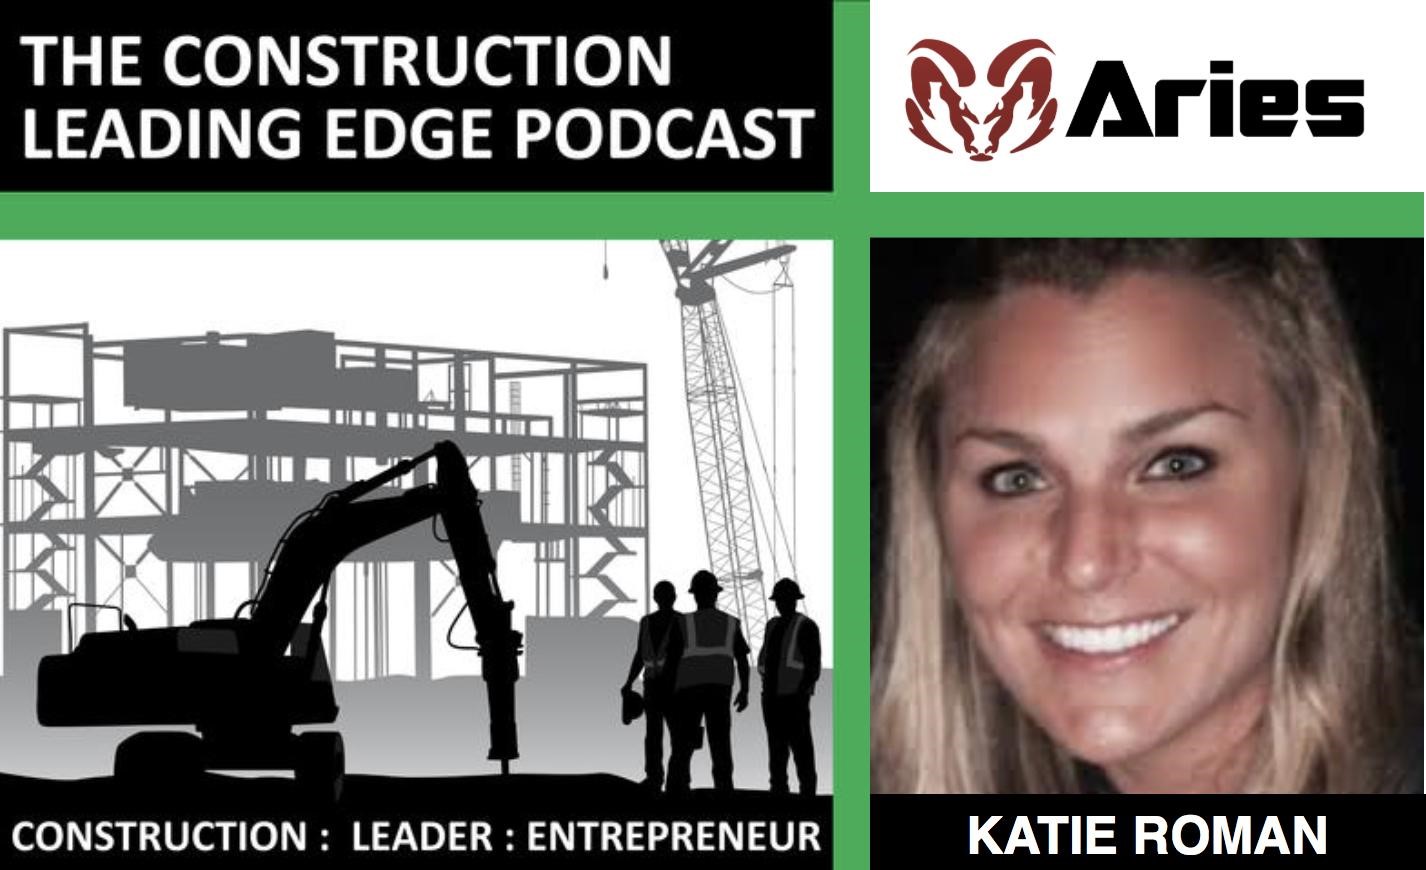 Graphics-based image showing silhouettes of workers on a construction site, next to a headshot of Katie Roman, a young blonde woman.